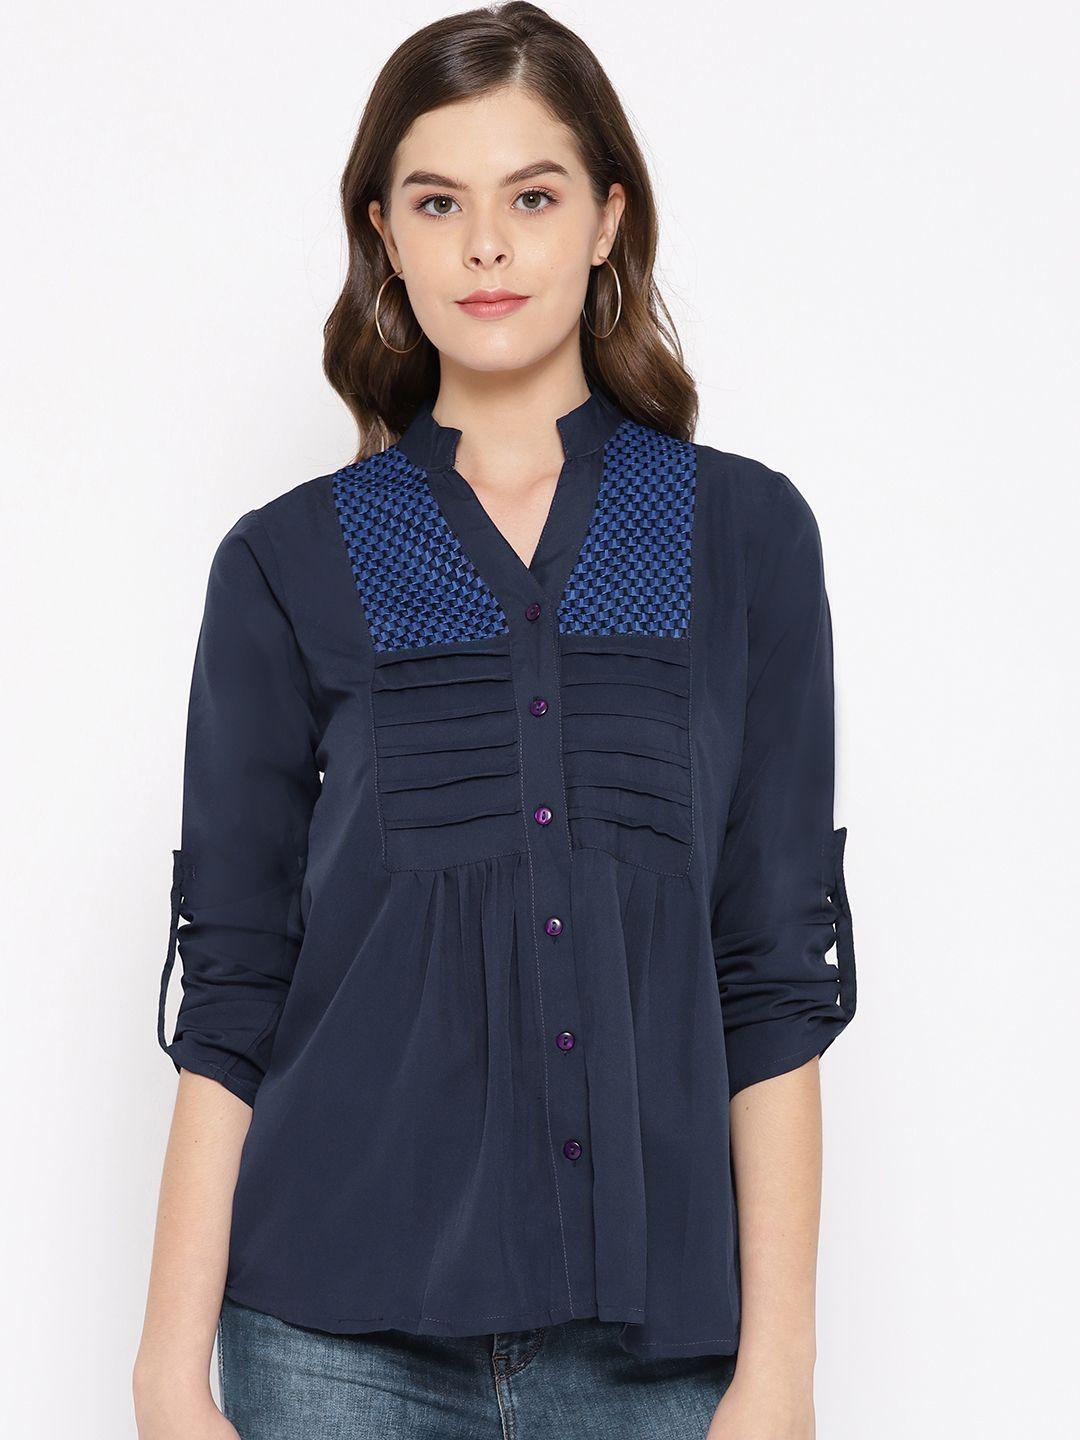 karmic vision women navy blue solid shirt style top